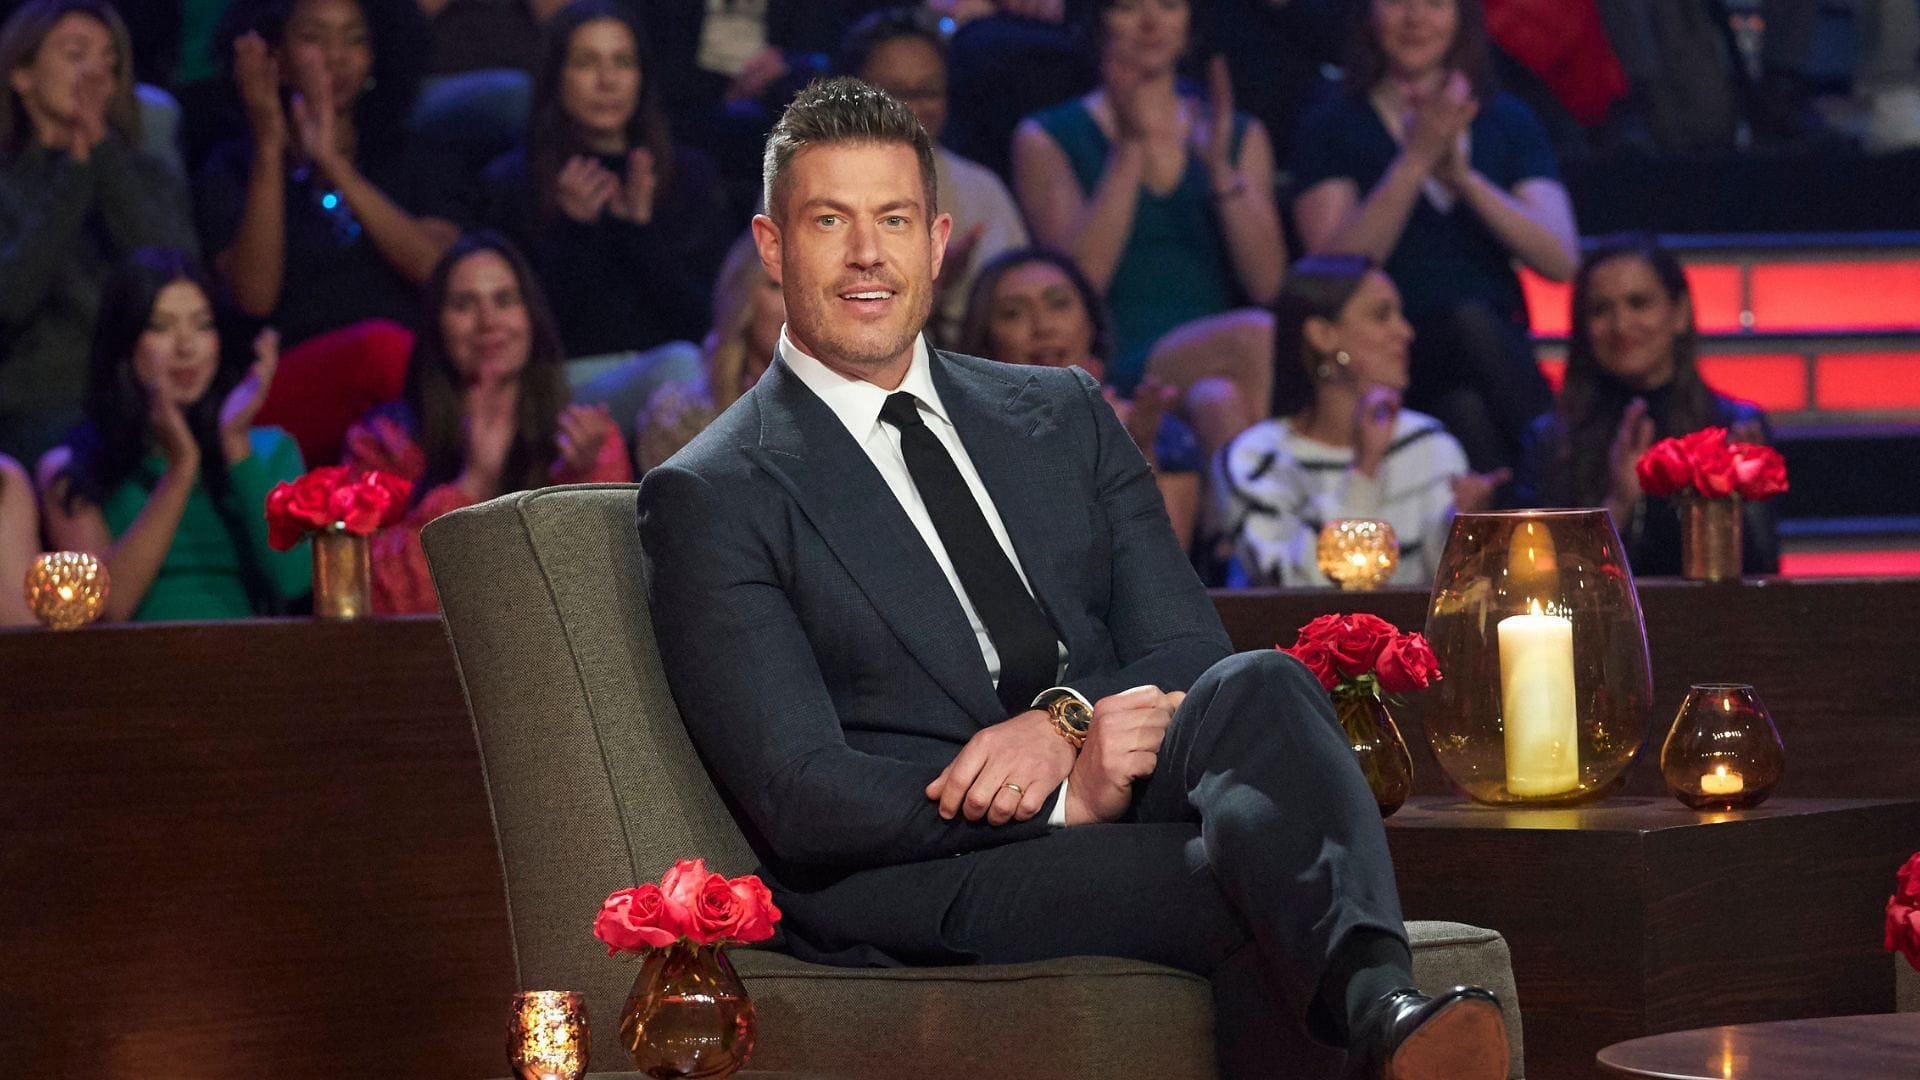 The Bachelor Producers Confront Diversity Issues After Years of Criticism